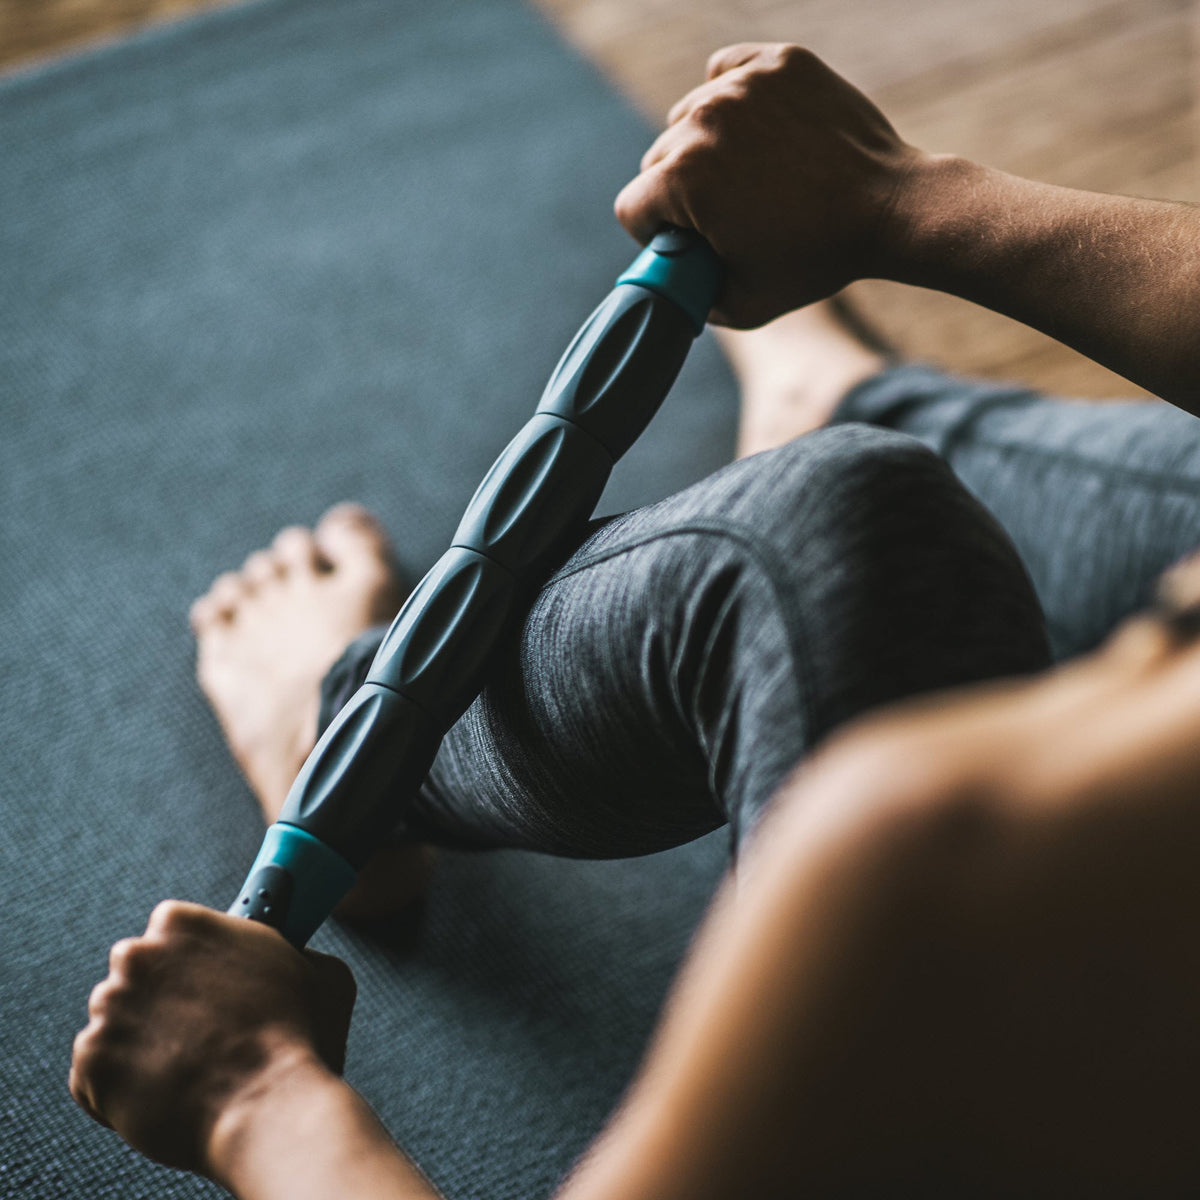 Massaging the lower leg with the Restore Total Body Massage Roller